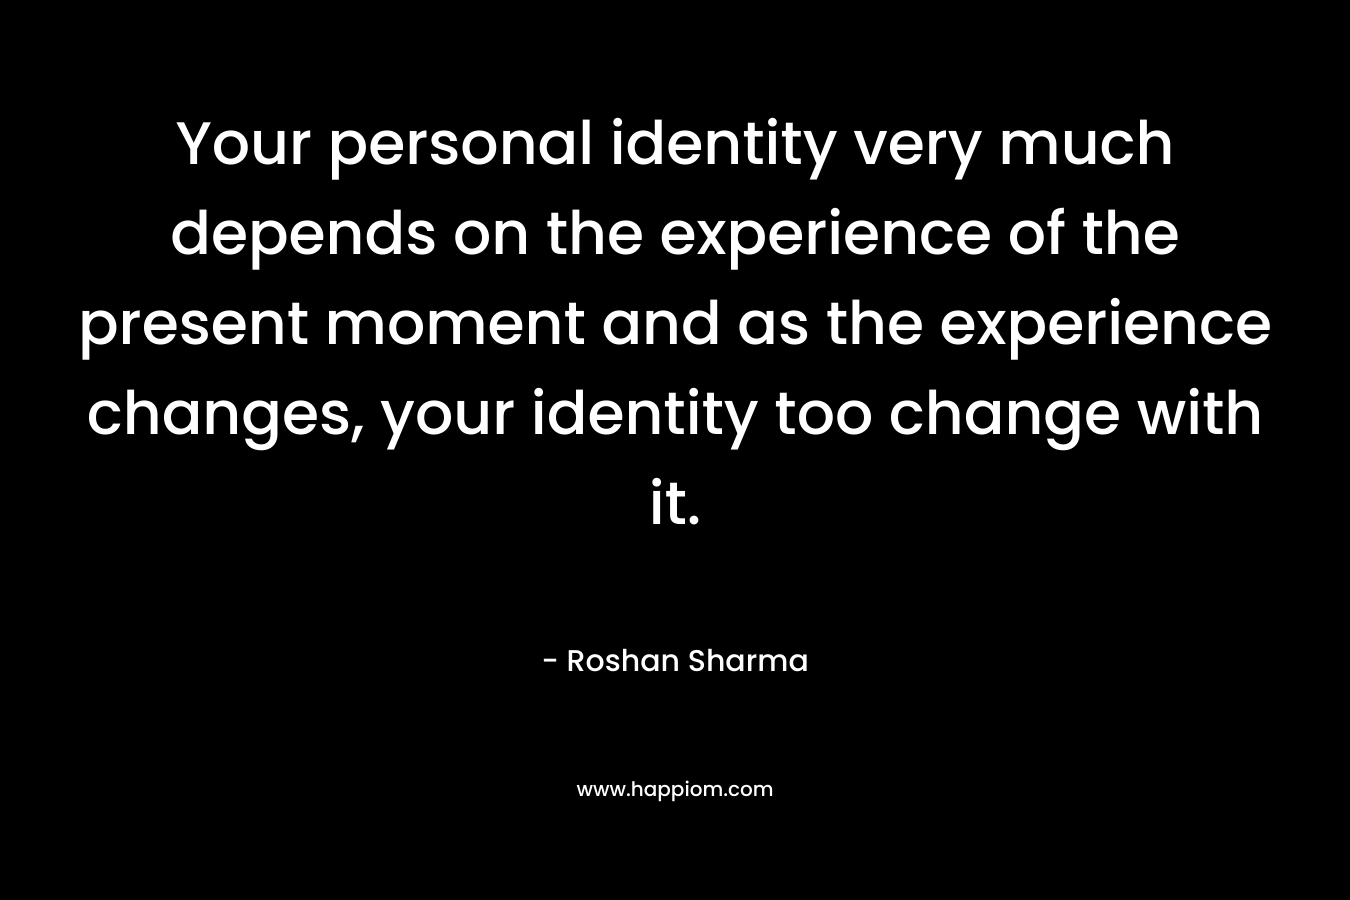 Your personal identity very much depends on the experience of the present moment and as the experience changes, your identity too change with it.